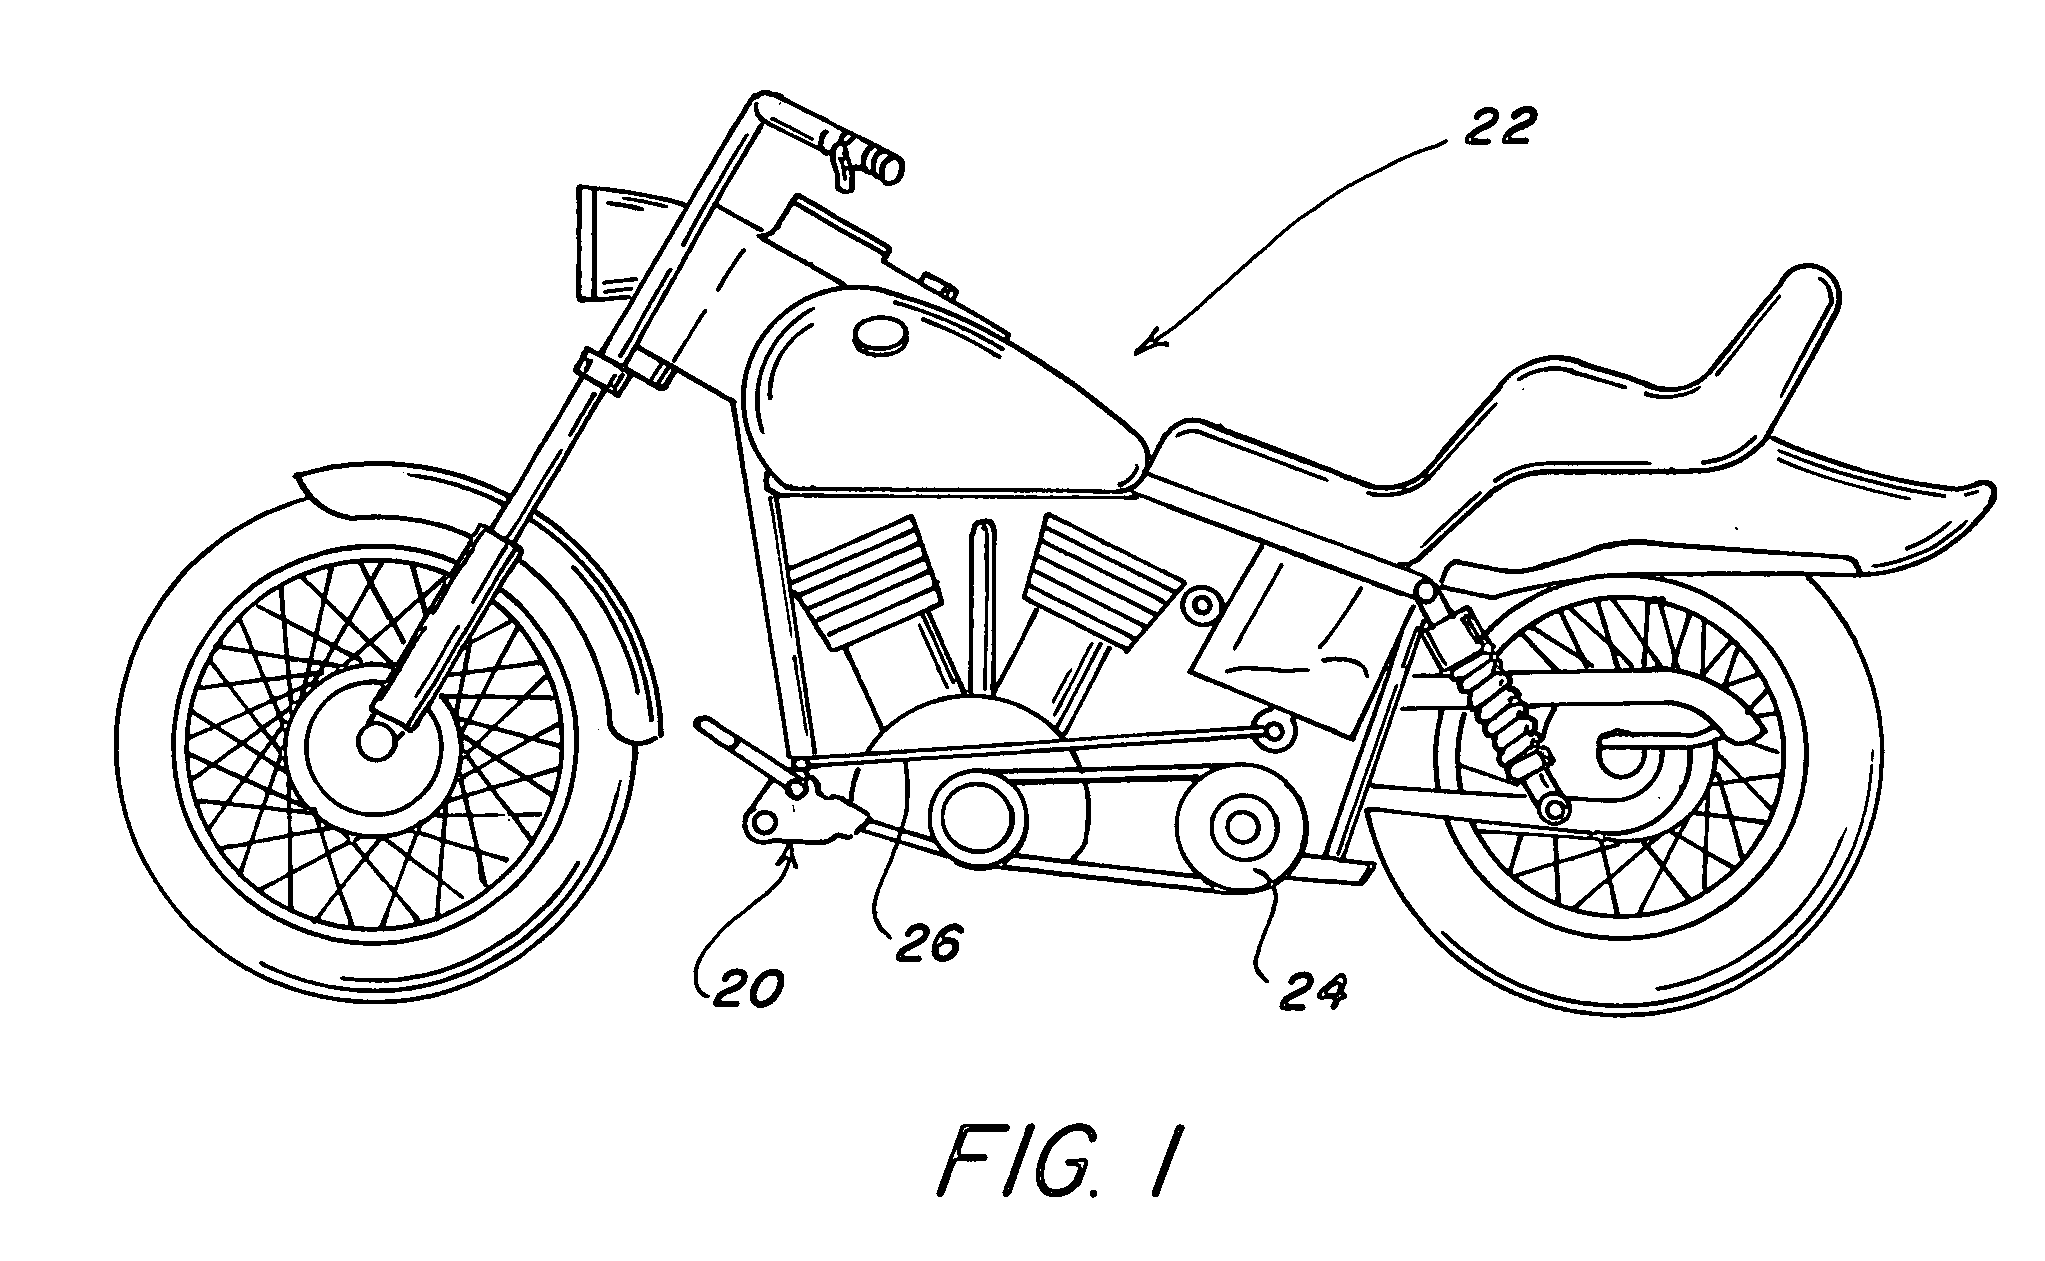 Foot operated motorcycle clutch